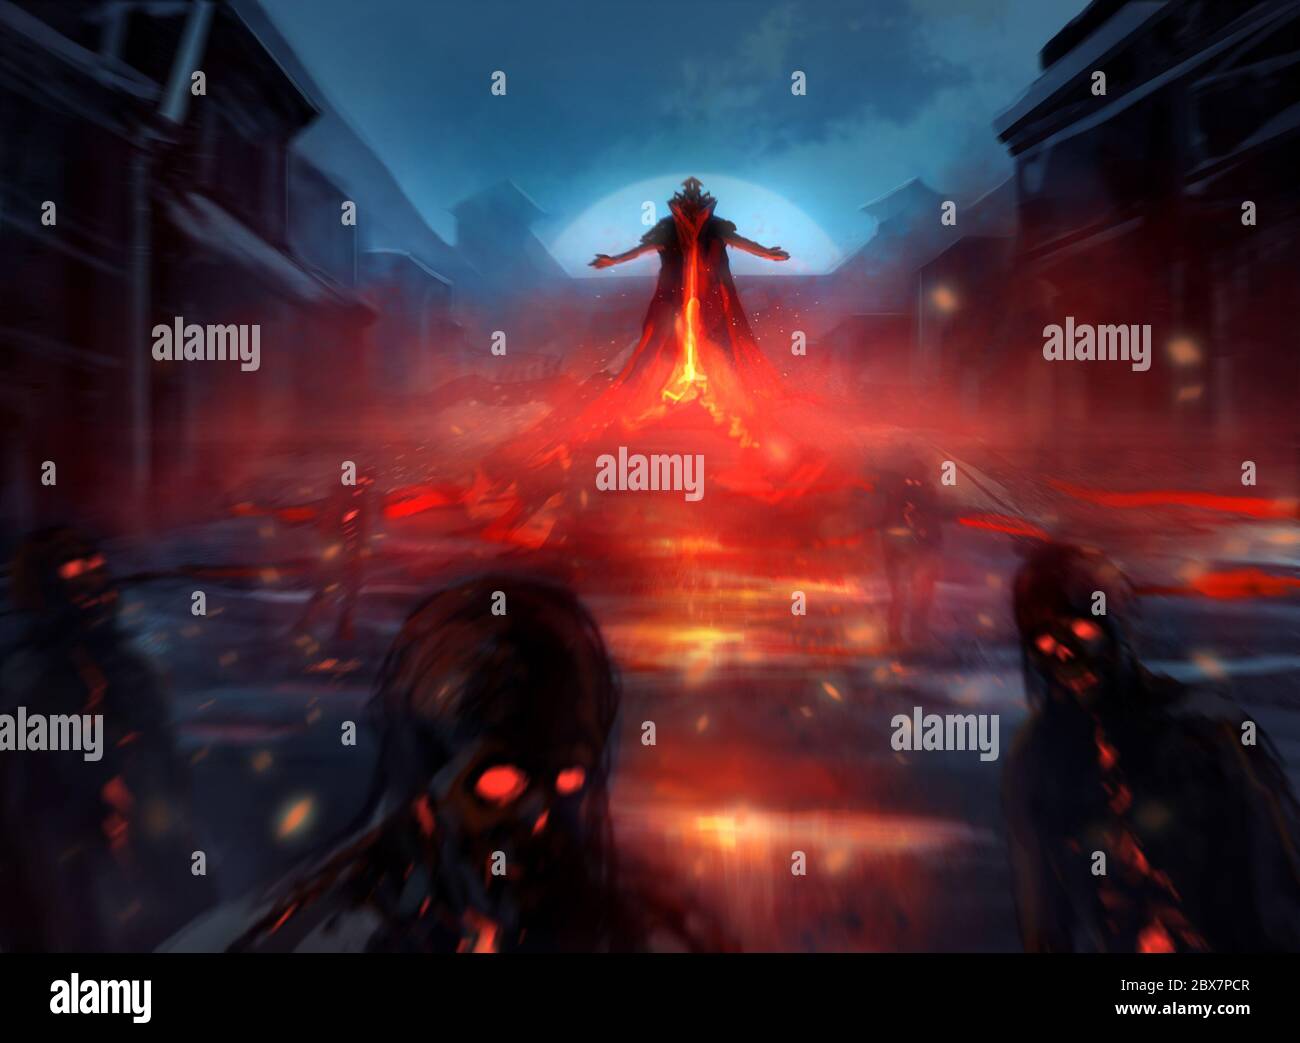 Illustration of a demon lord summoning evil zombie forces with fire effects and blurry mist. Stock Photo